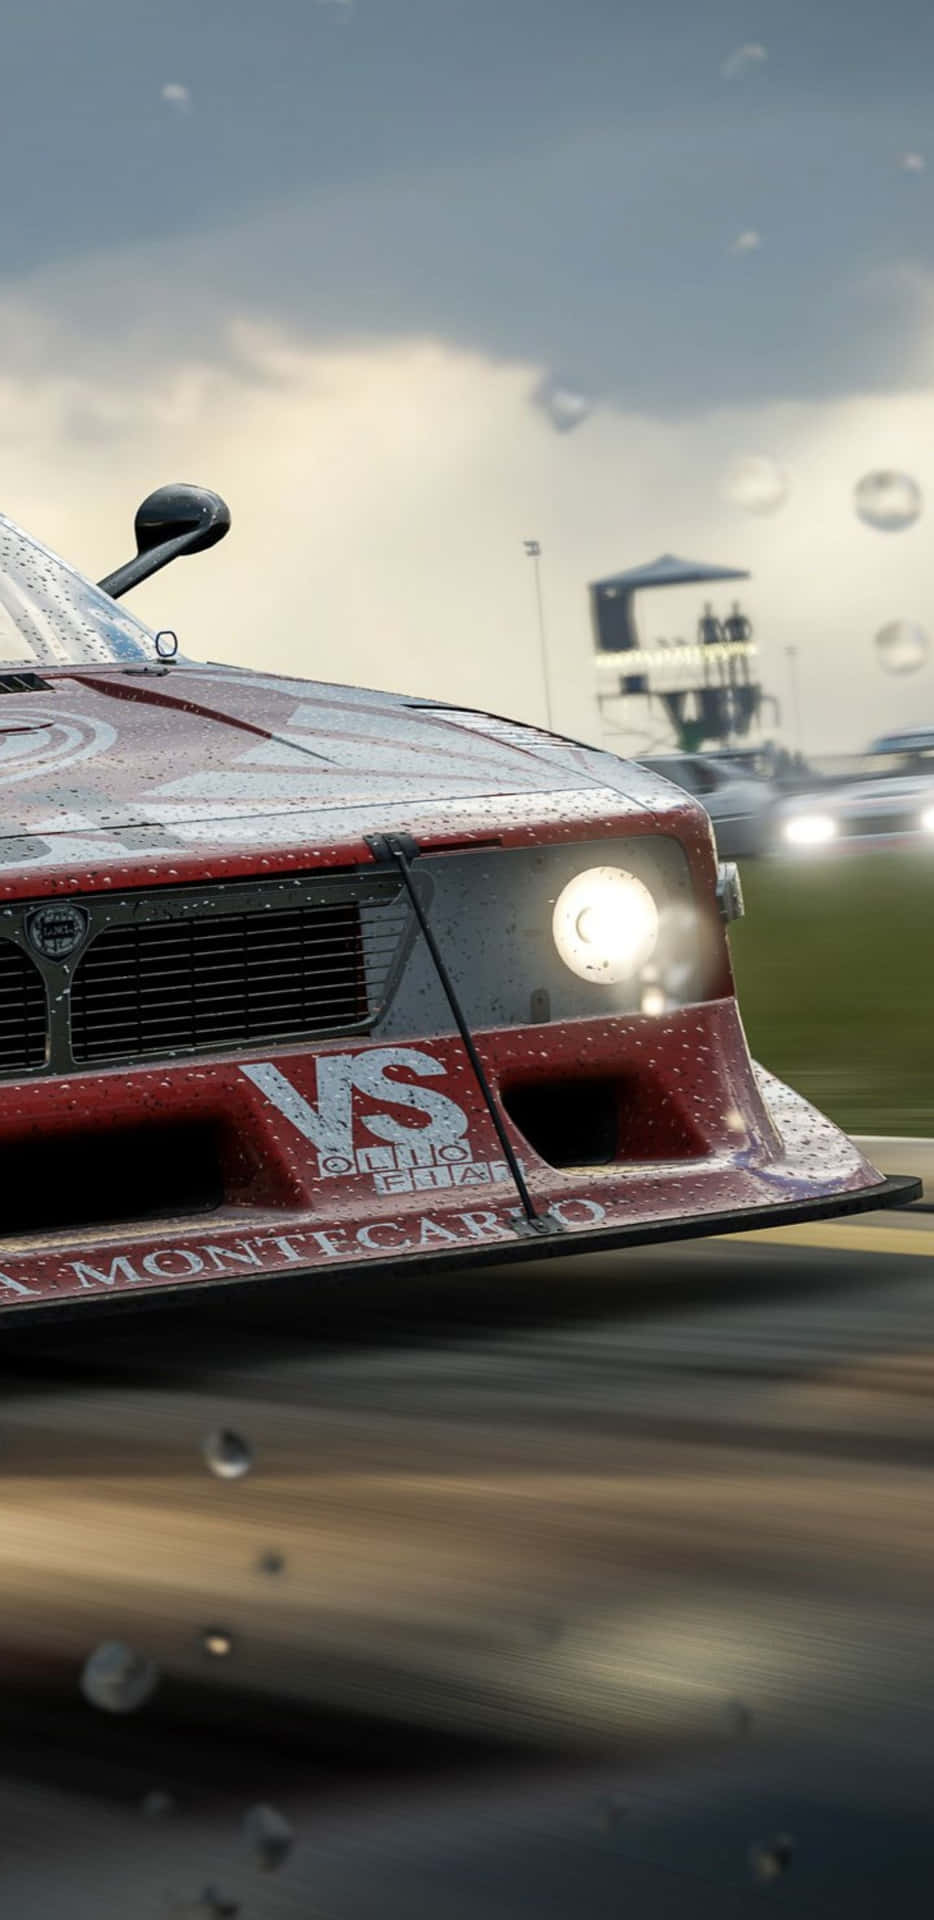 Lose yourself in the racing action of Forza Motorsport 7 on the Google Pixel 3xl